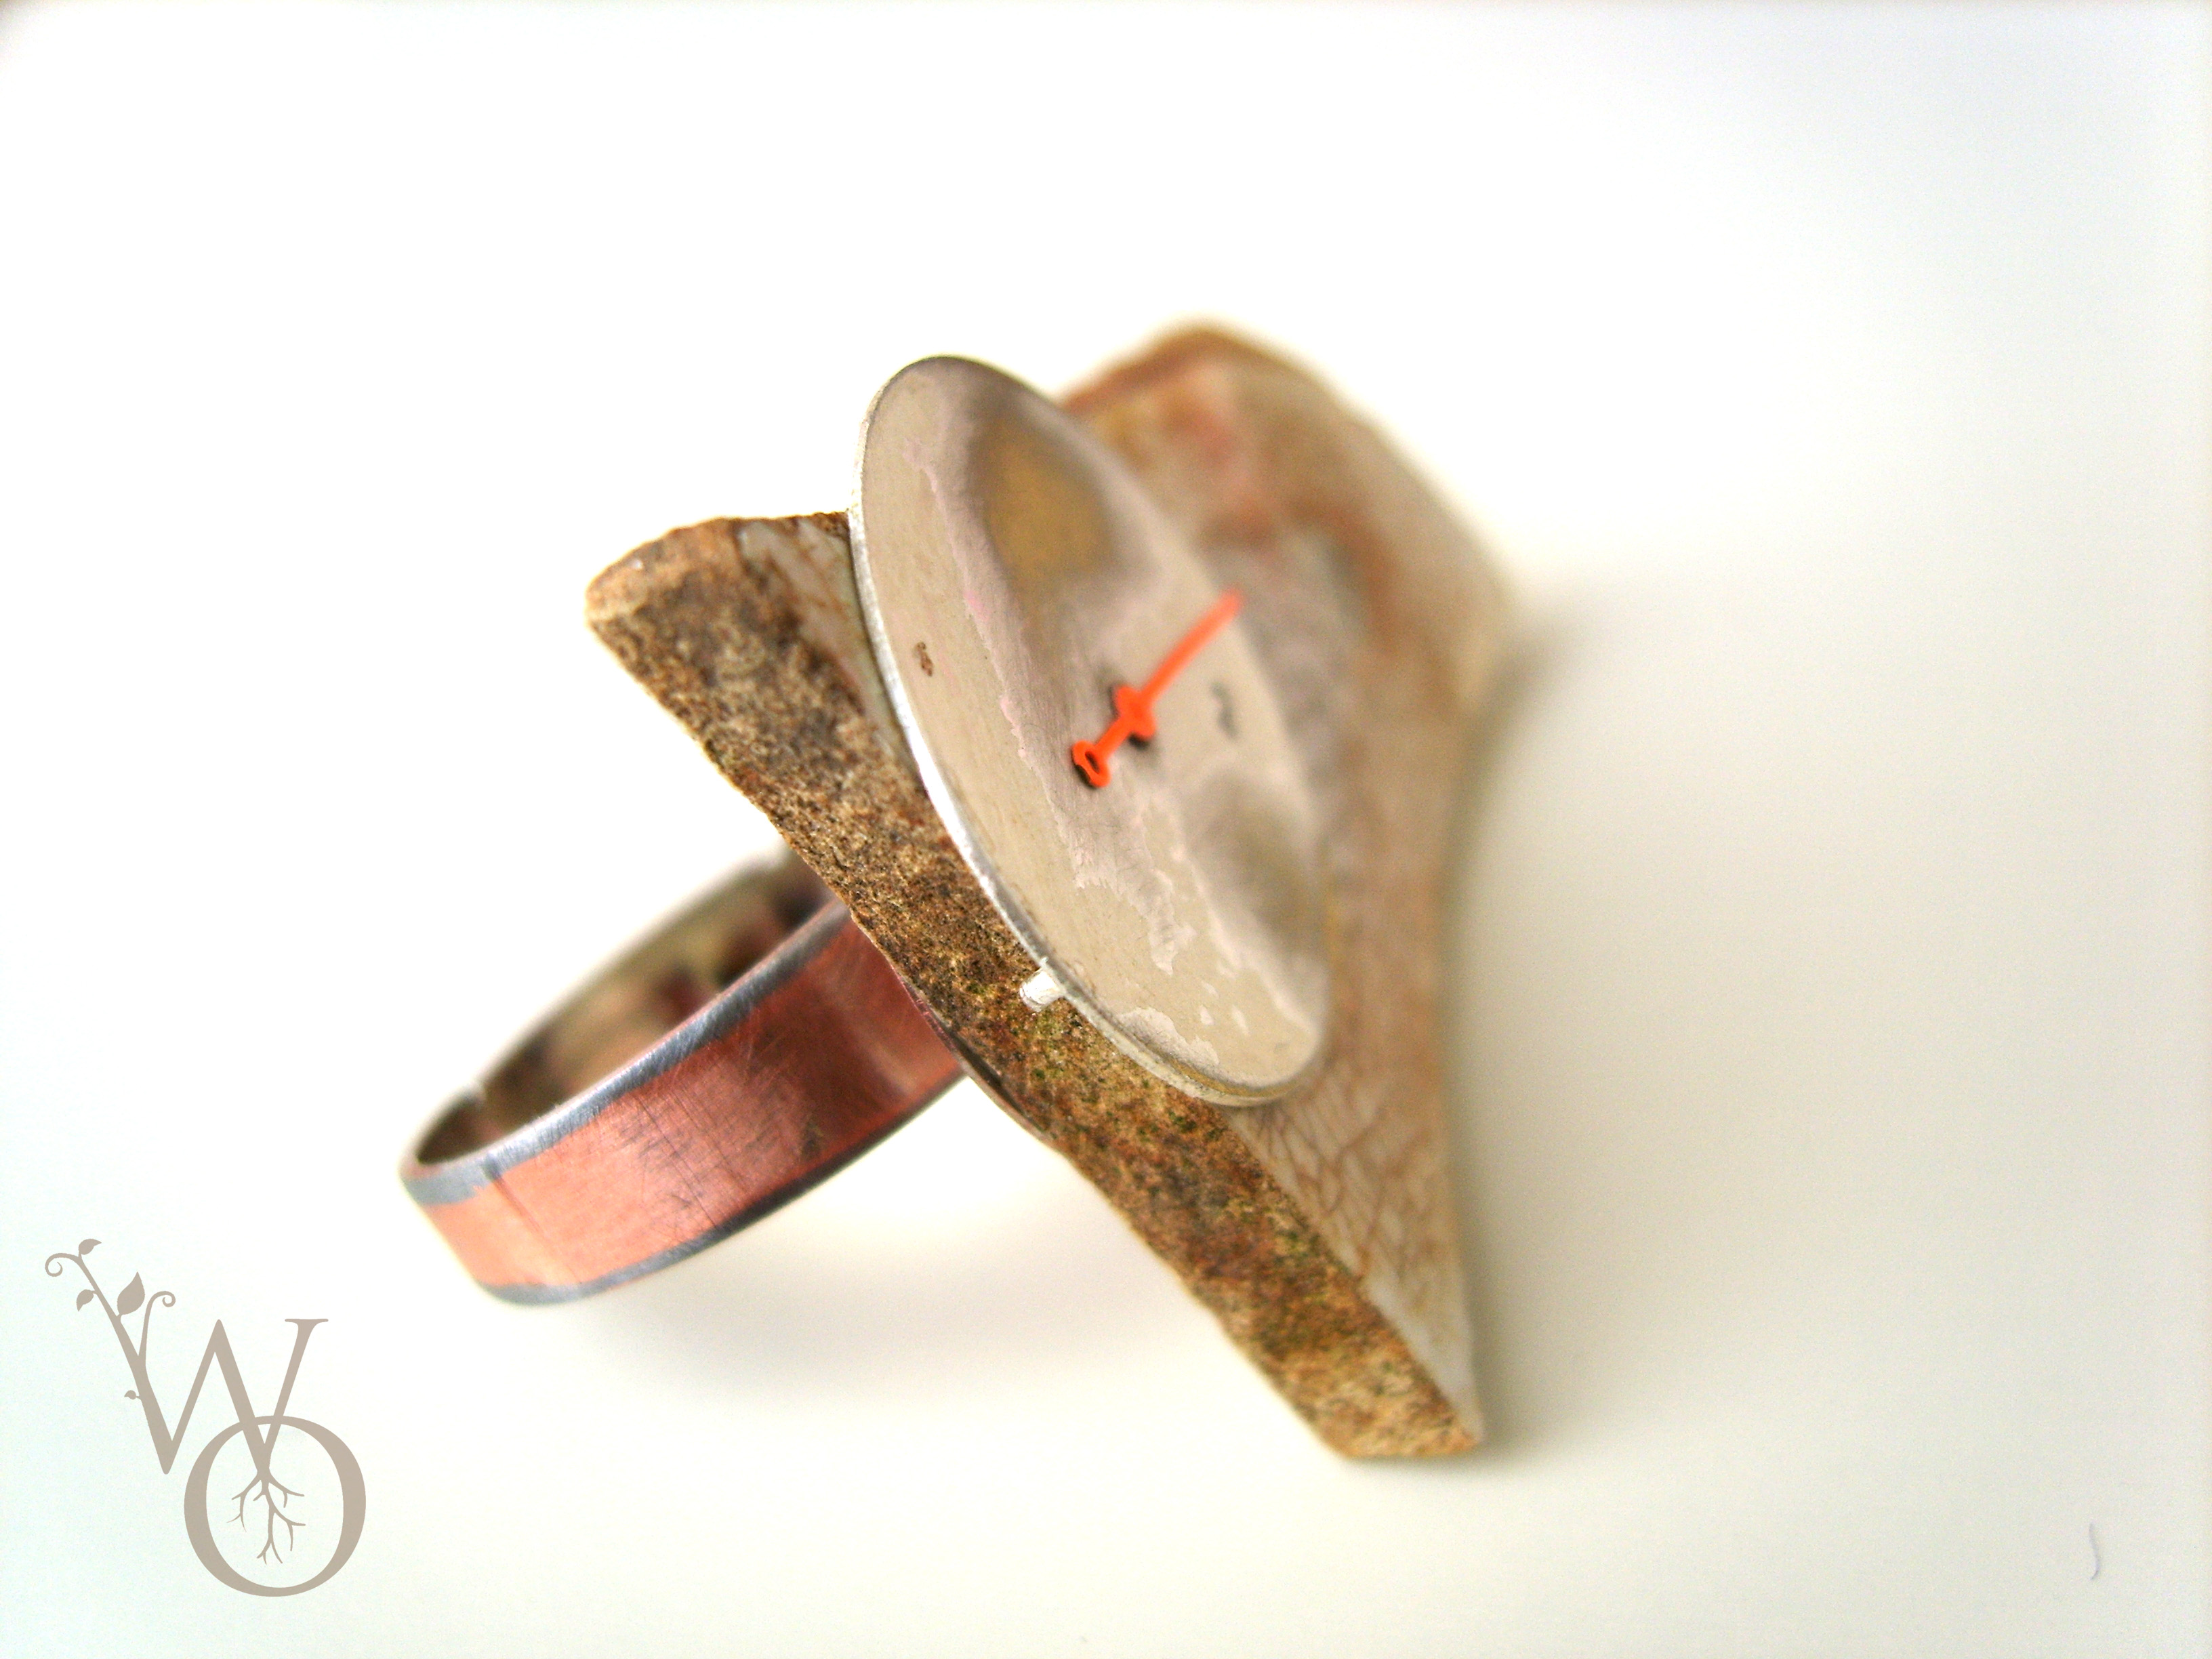 side view of ring with clock parts and aged ceramics